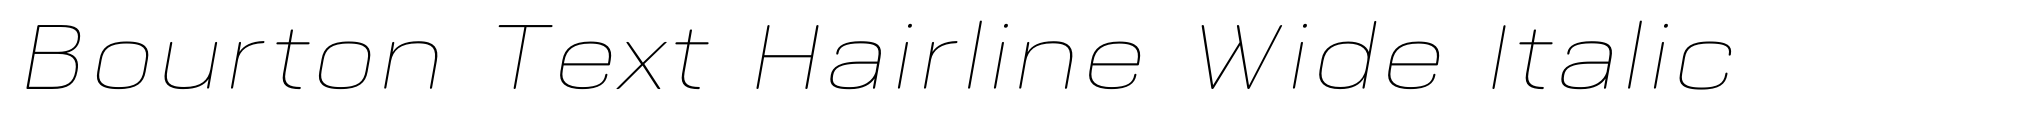 Bourton Text Hairline Wide Italic image